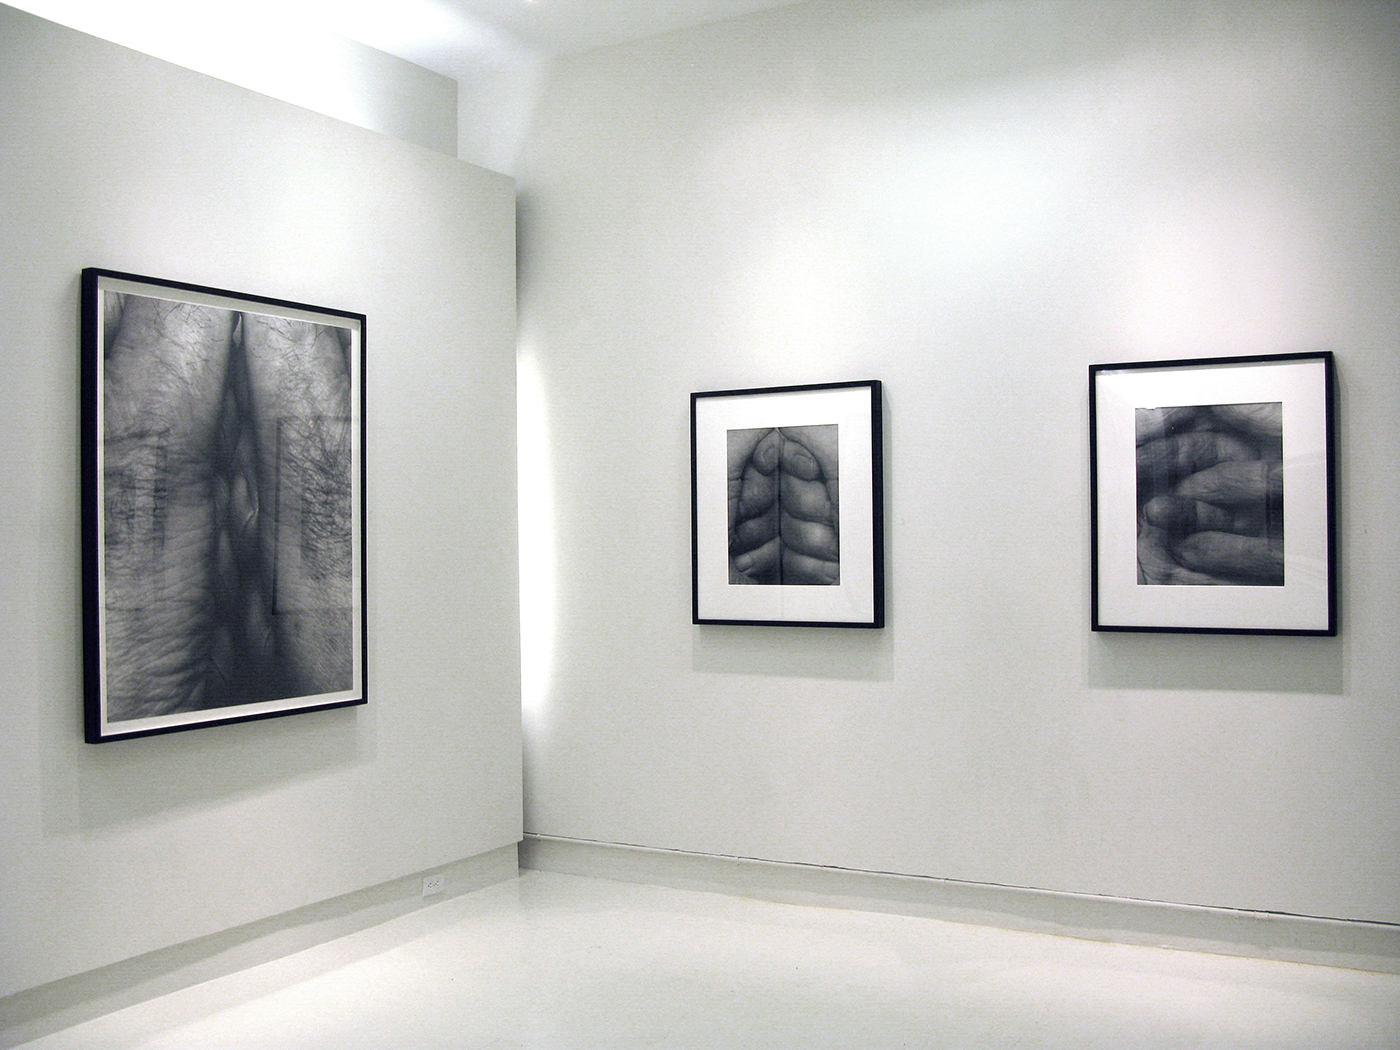 Installation view, from left: "Interlocking Fingers, No. 22, 2000," 47 x 38 in.; "Interlocking Fingers, No. 20, 2000," 22 x 18 in.; "Interlocking Fingers, No. 9, 1999," 22 x 18 in.